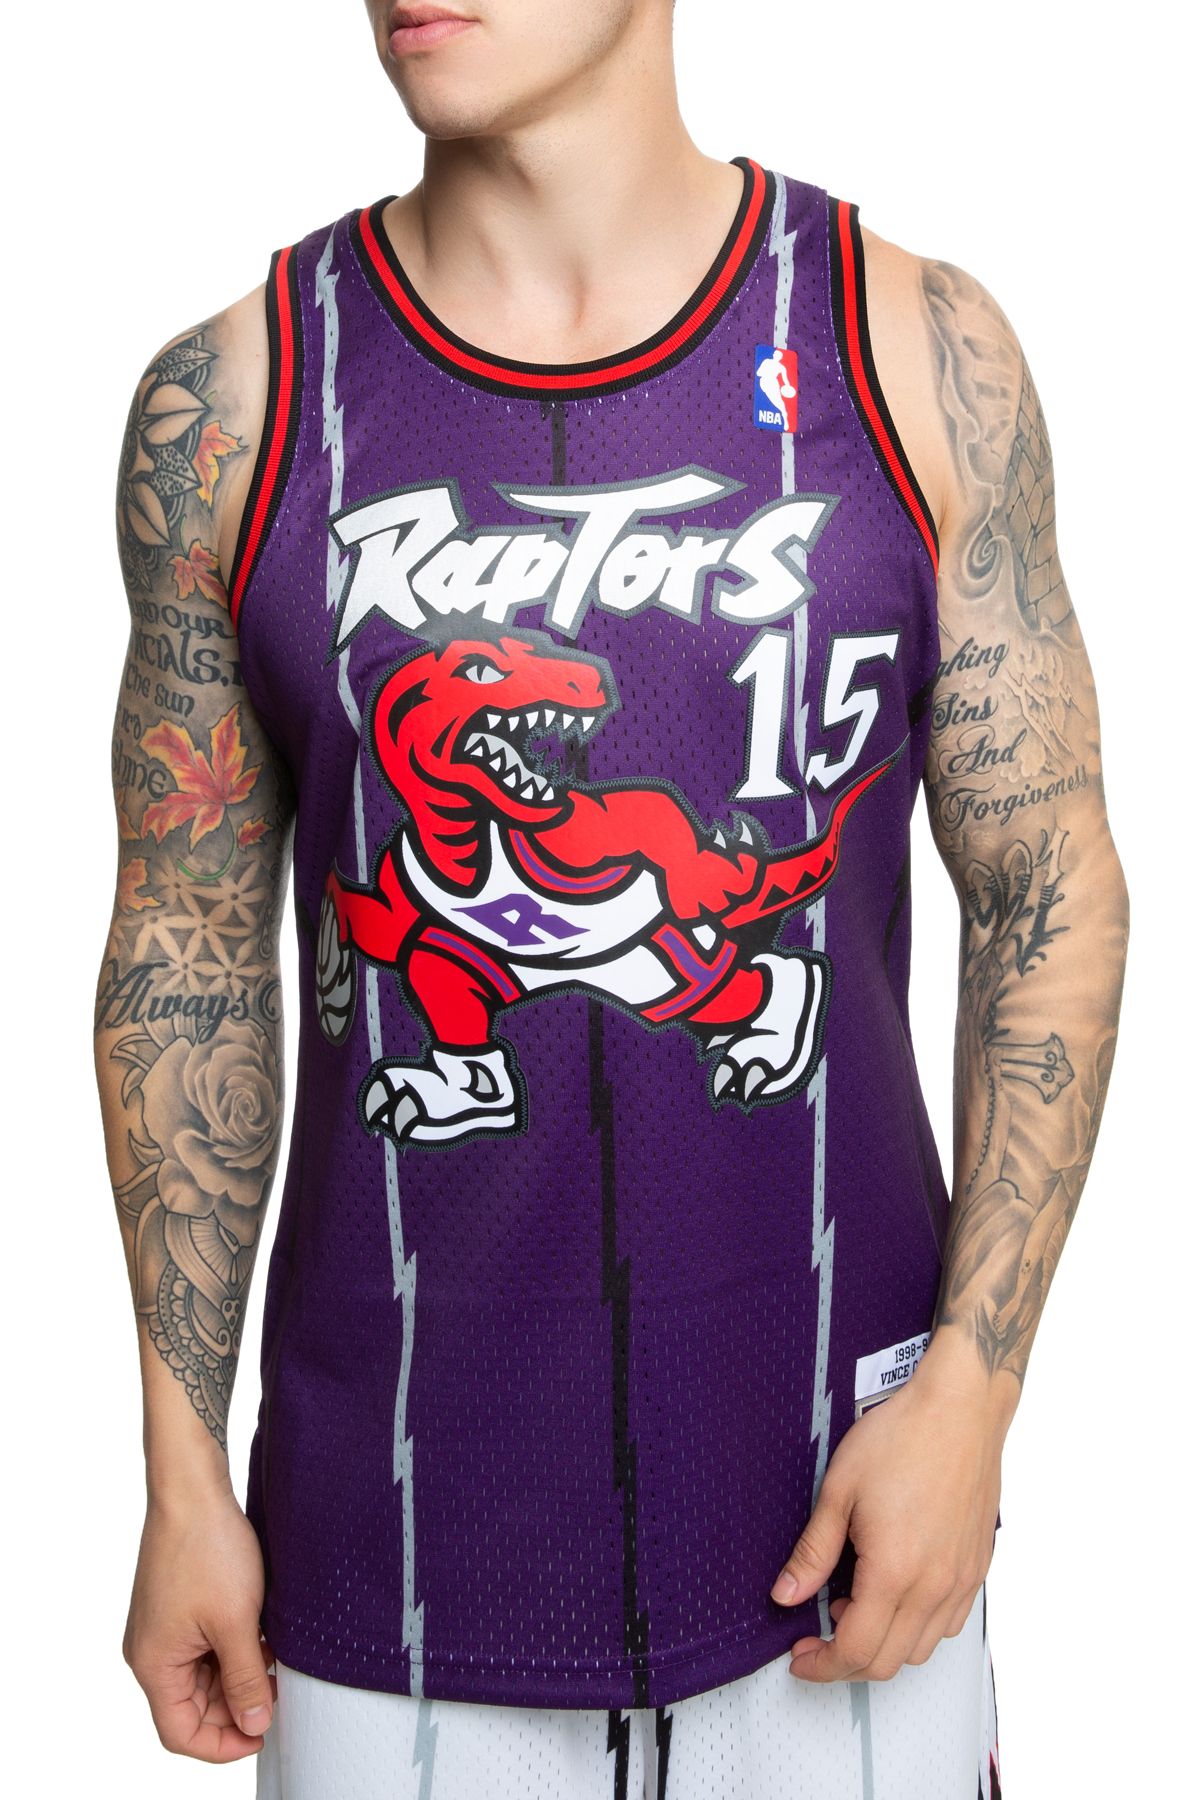 vince carter mitchell and ness jersey